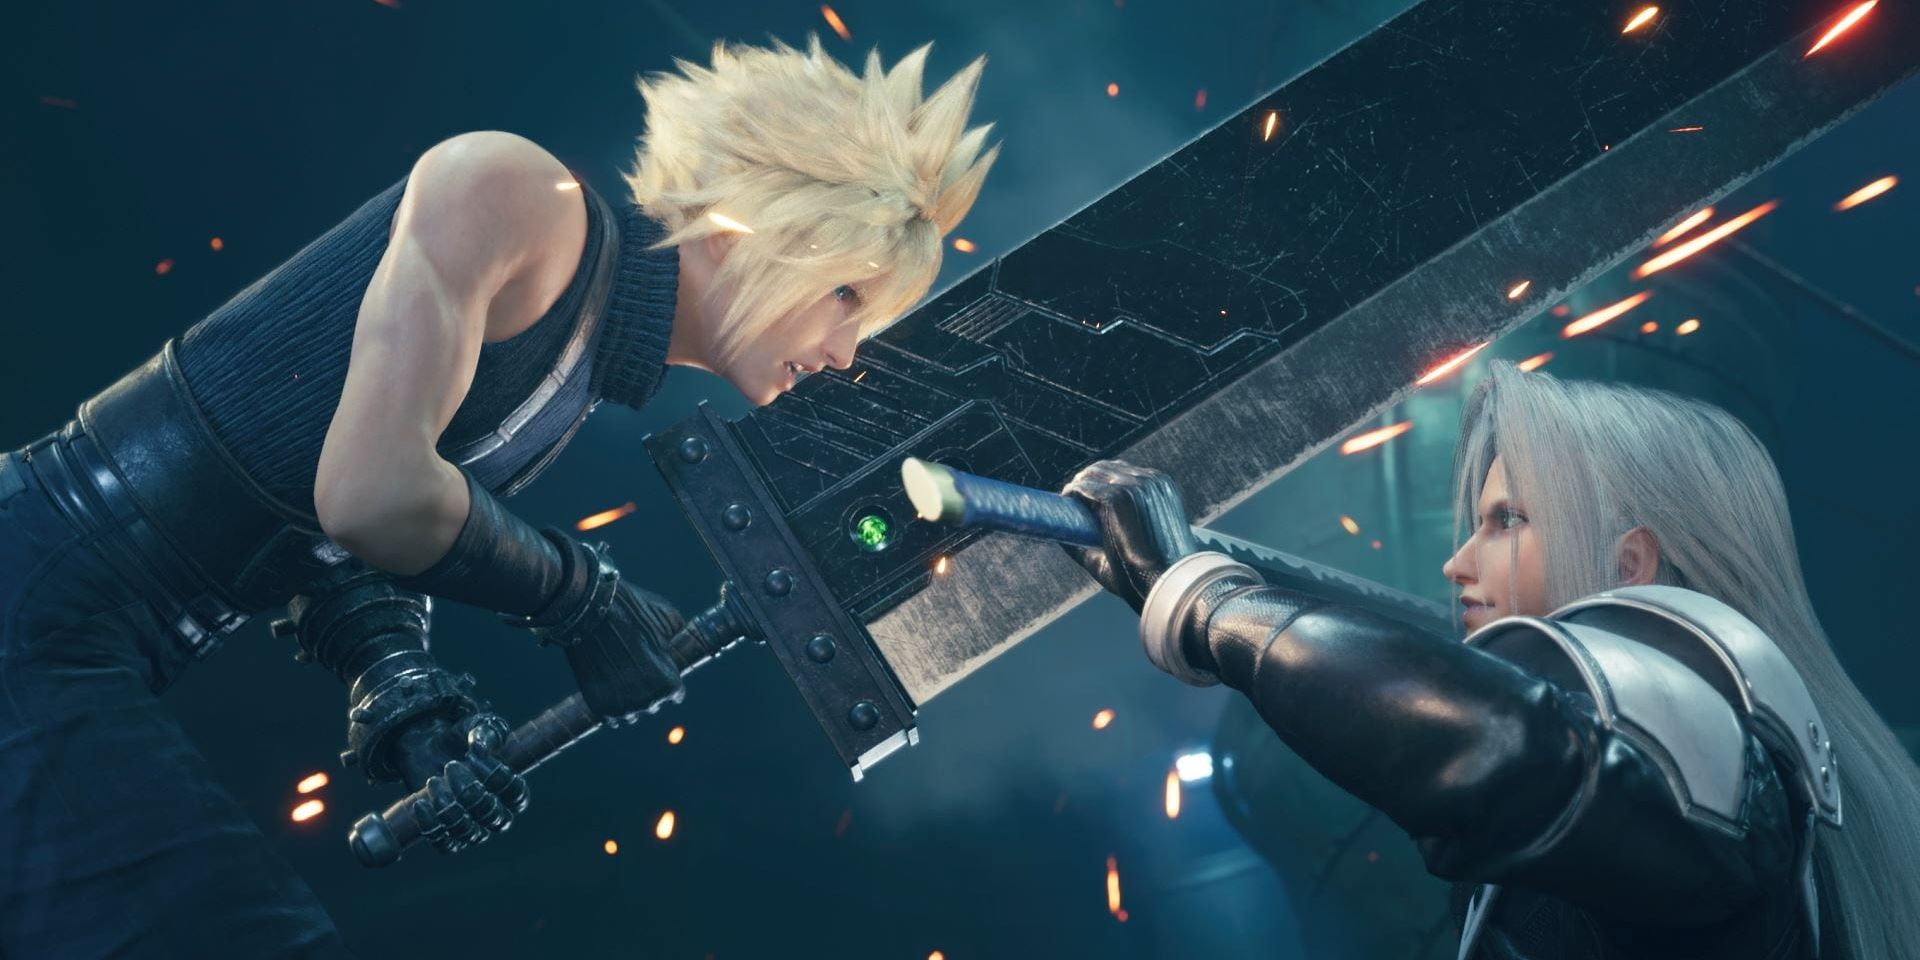 Cloud clashes his oversized buster sword with Sephiroth's katana in combat in Final Fantasy 7 Remake.